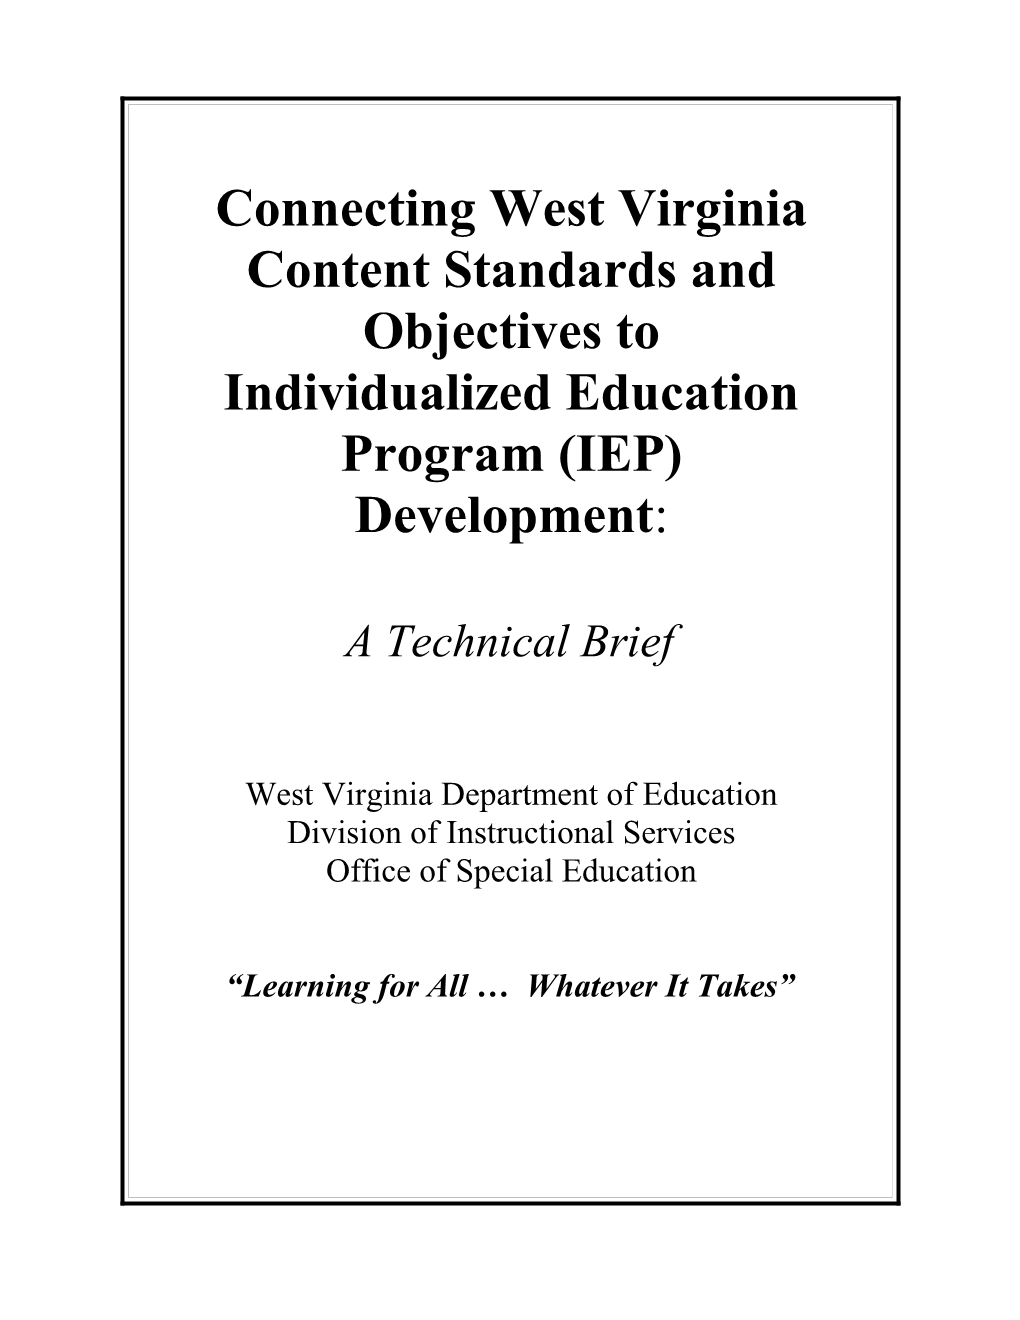 Connecting West Virginia Content Standards and Objectives To